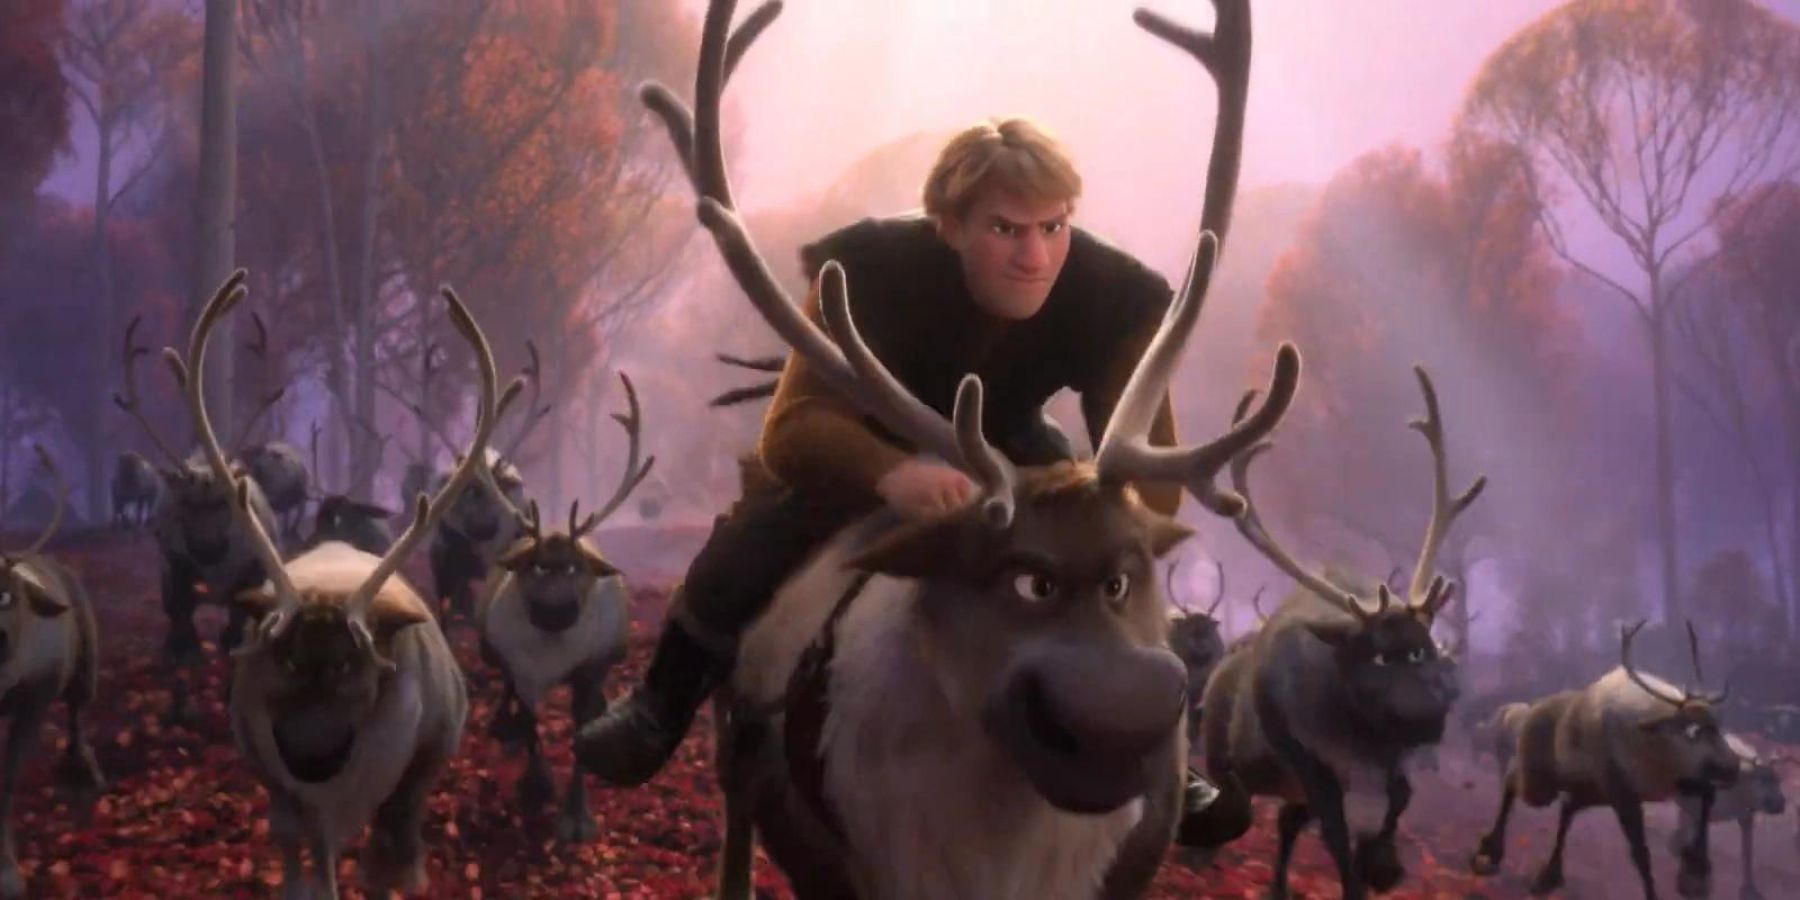 Kristoff and Sven ride into battle with reindeer in Frozen 2